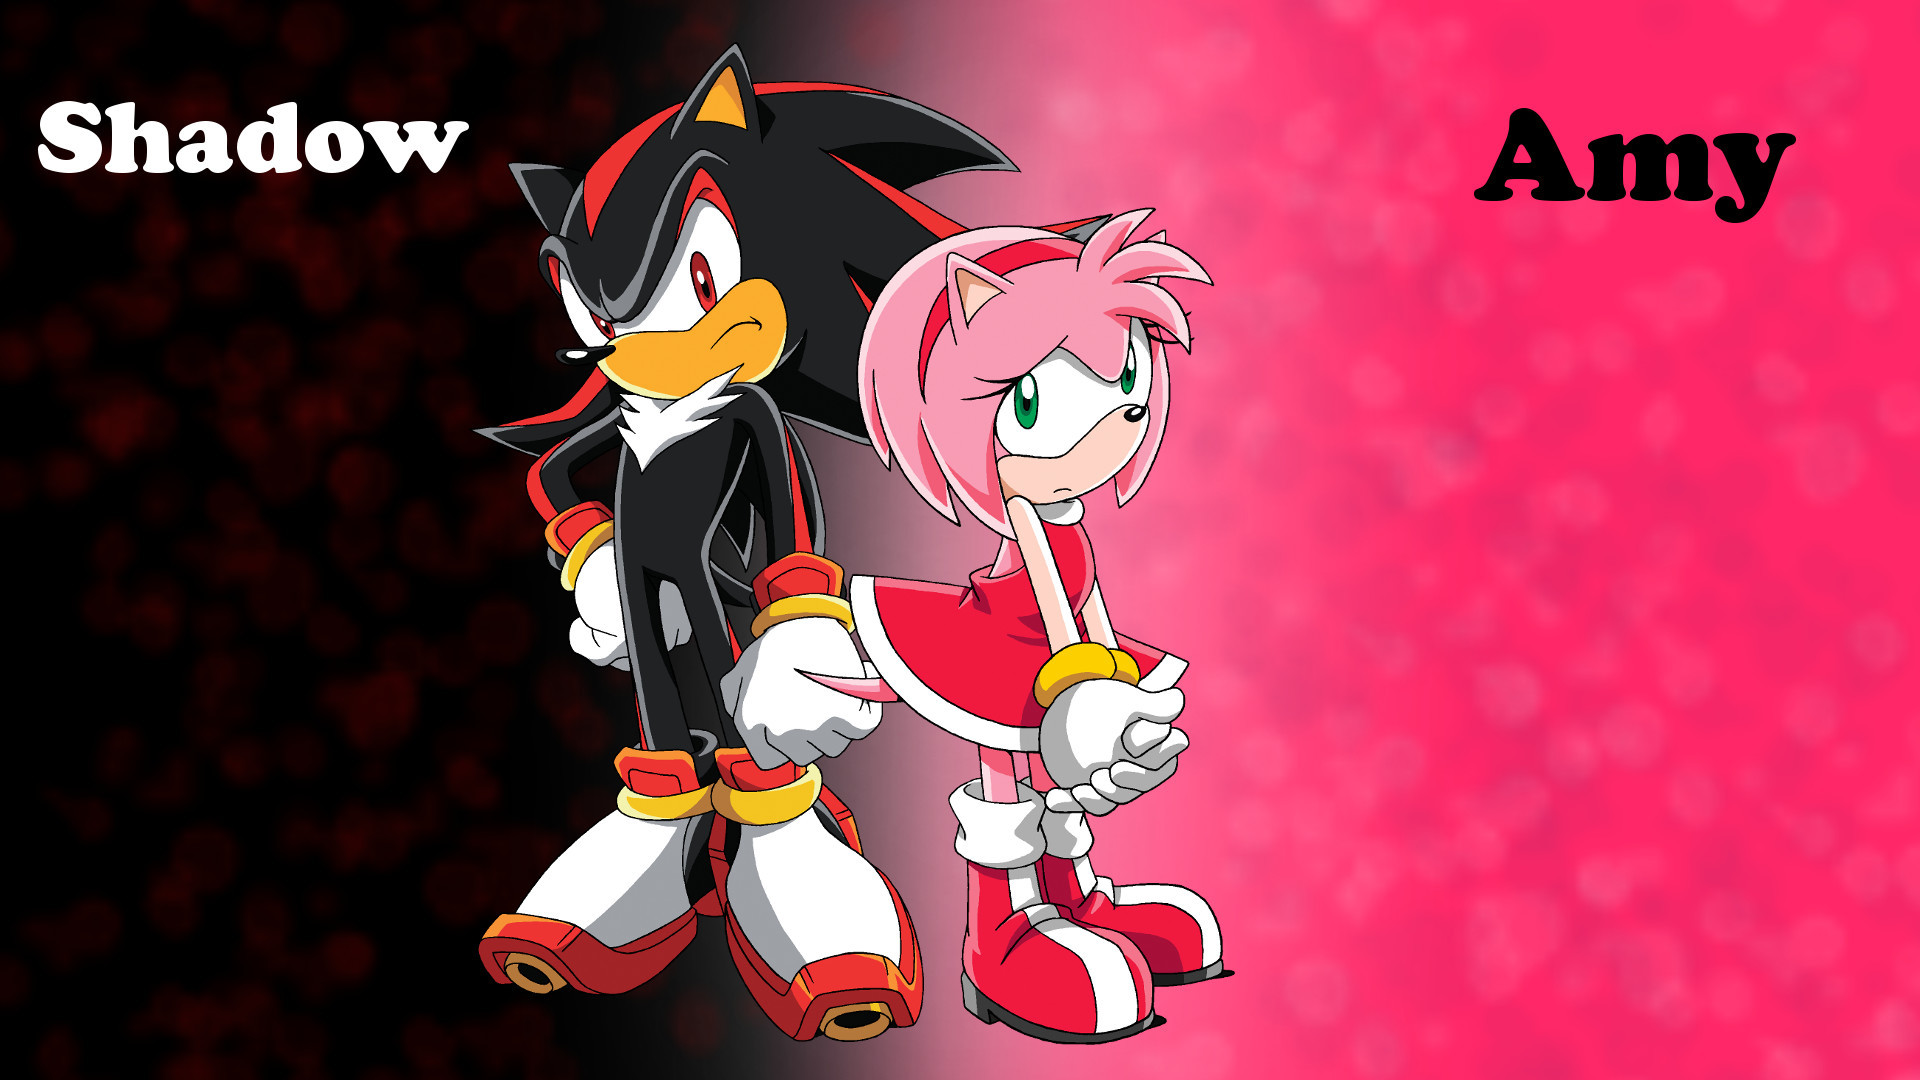 1920x1080 wallpaper by Hinata70756 on DeviantArt amy rose de sonic x by DoriThief on